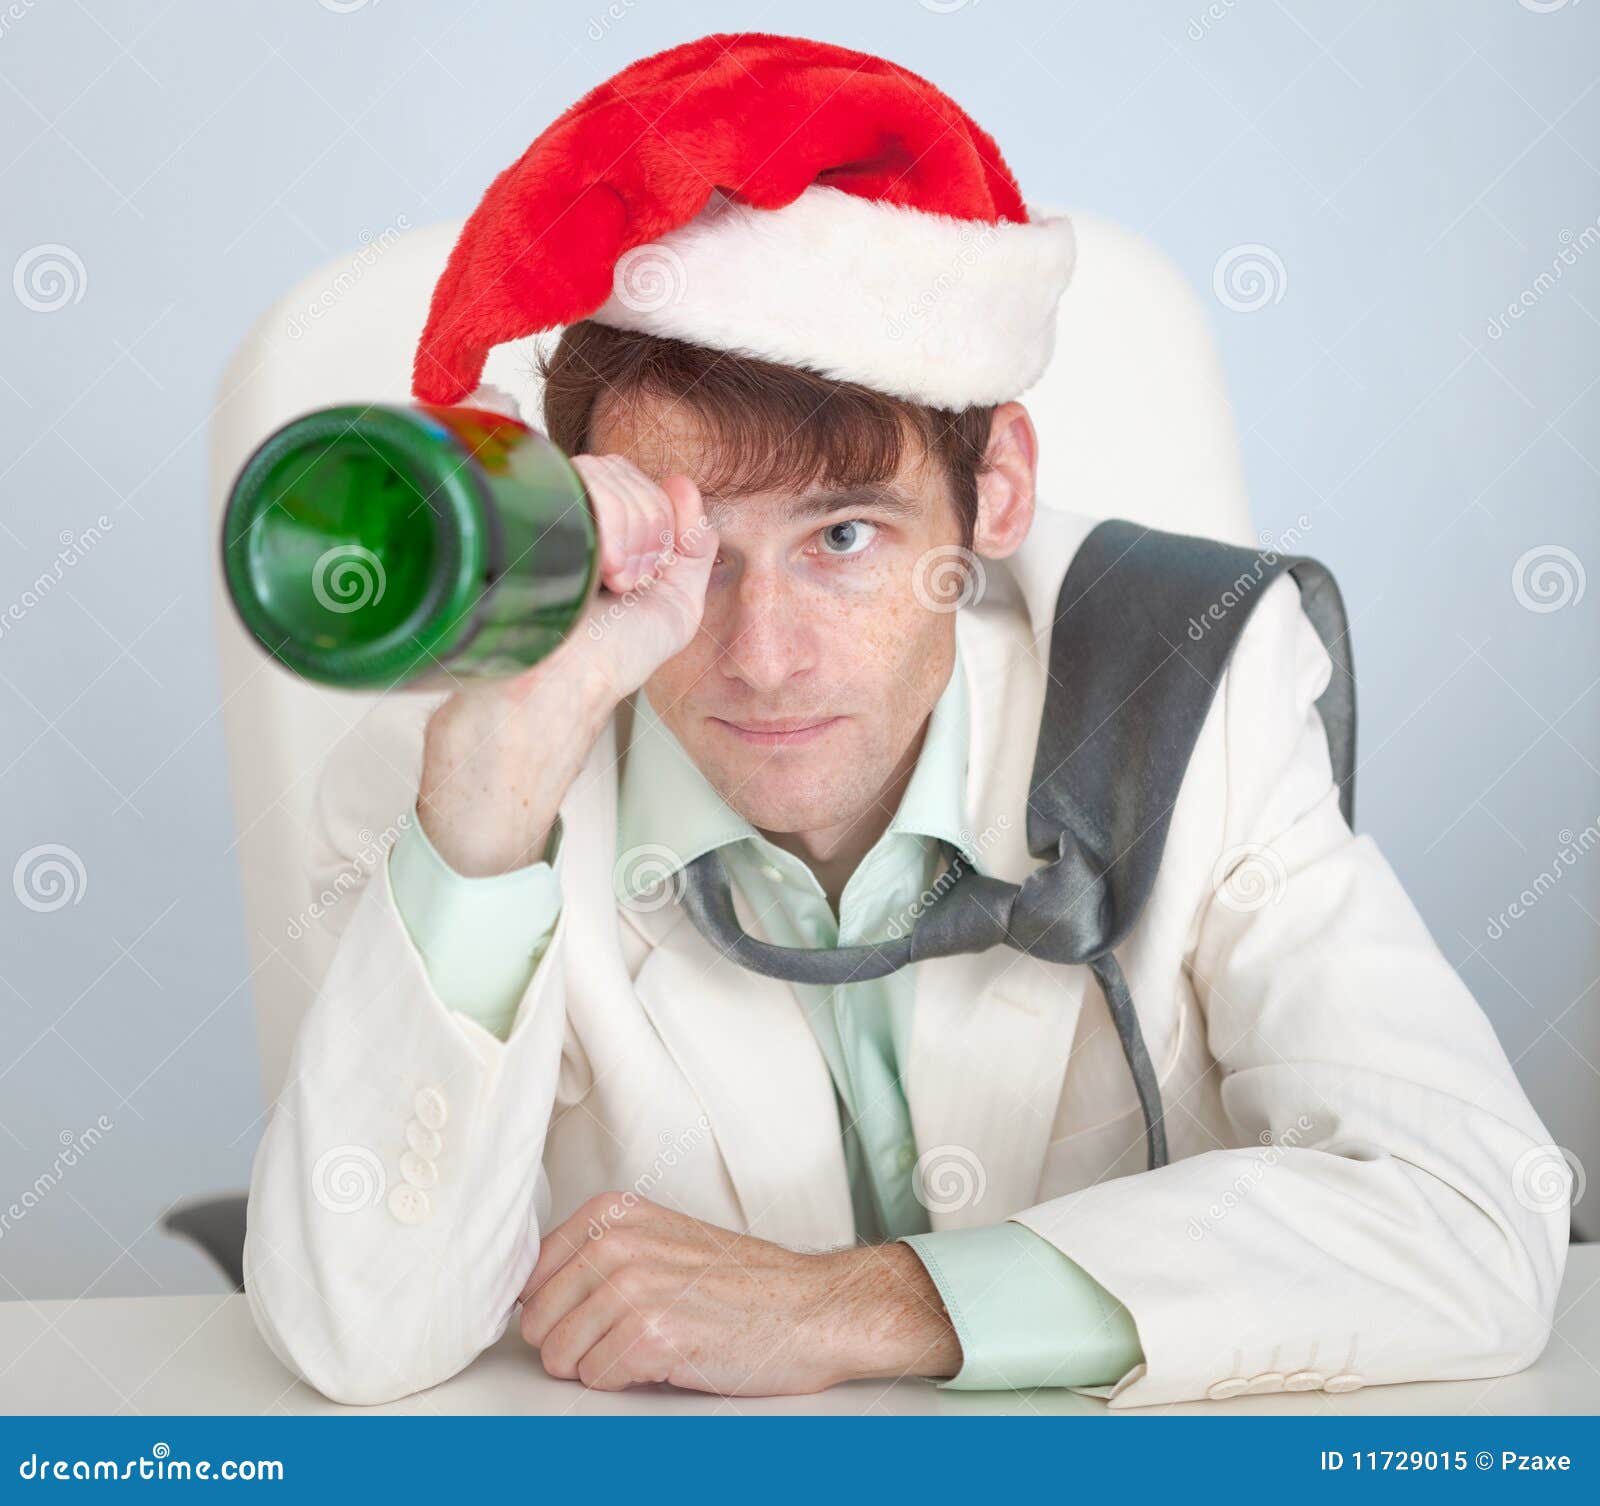 Drunk Man In Christmas Cap Plays With Bottle Stock Image Image Of Celebrating Look 11729015 